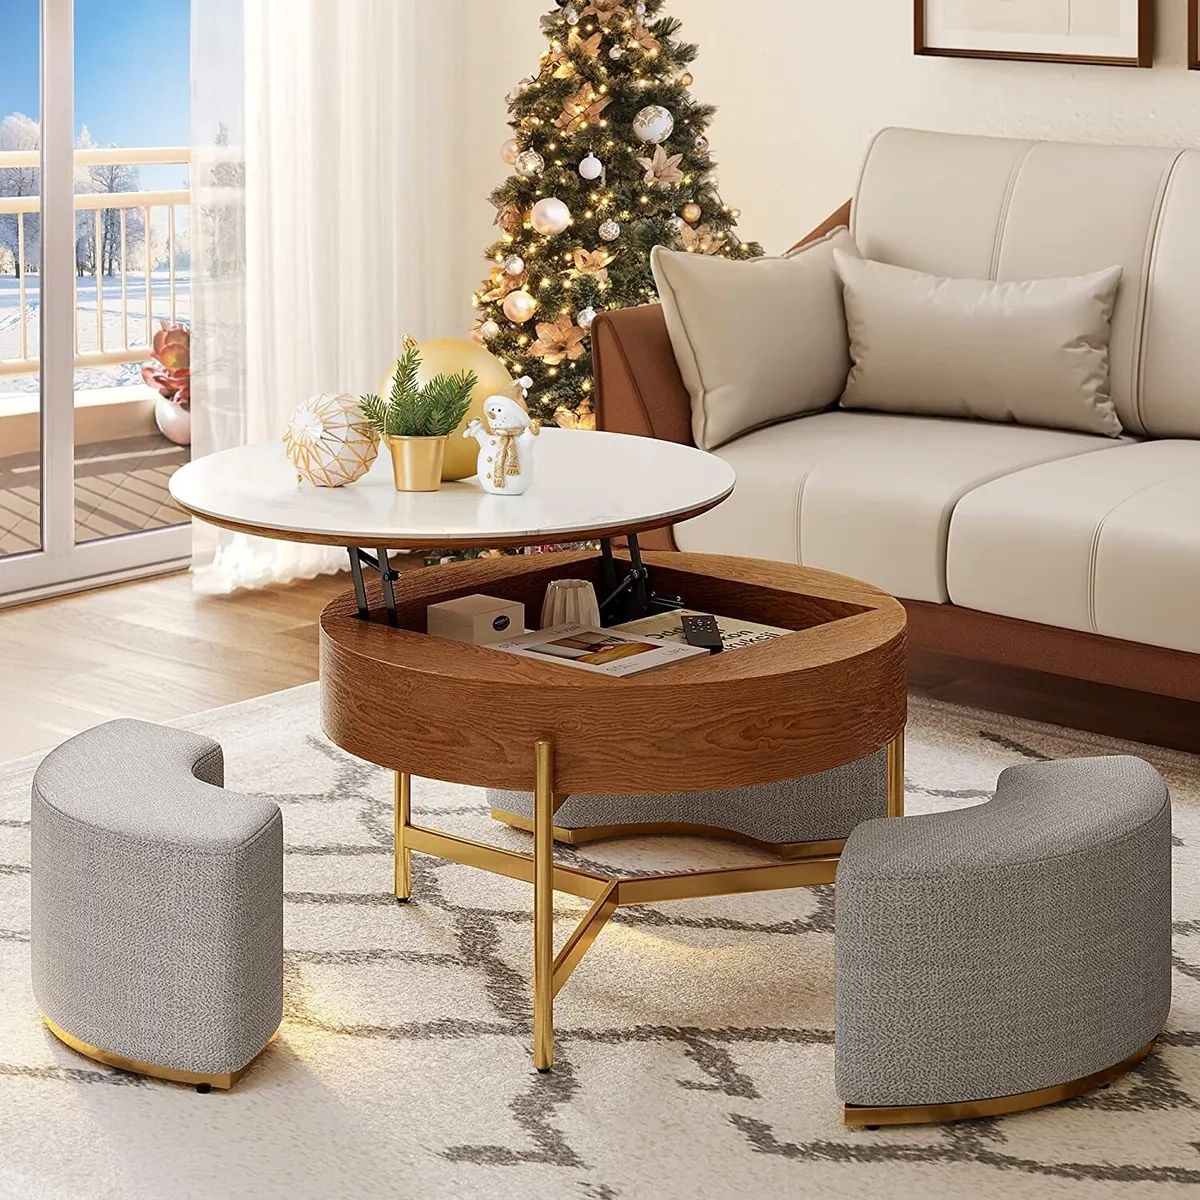 Lift Top Round Coffee Table With Hidden Storage Compartment 3 Stools Living  Room | Ebay Within Modern Coffee Tables With Hidden Storage Compartments (Photo 4 of 15)